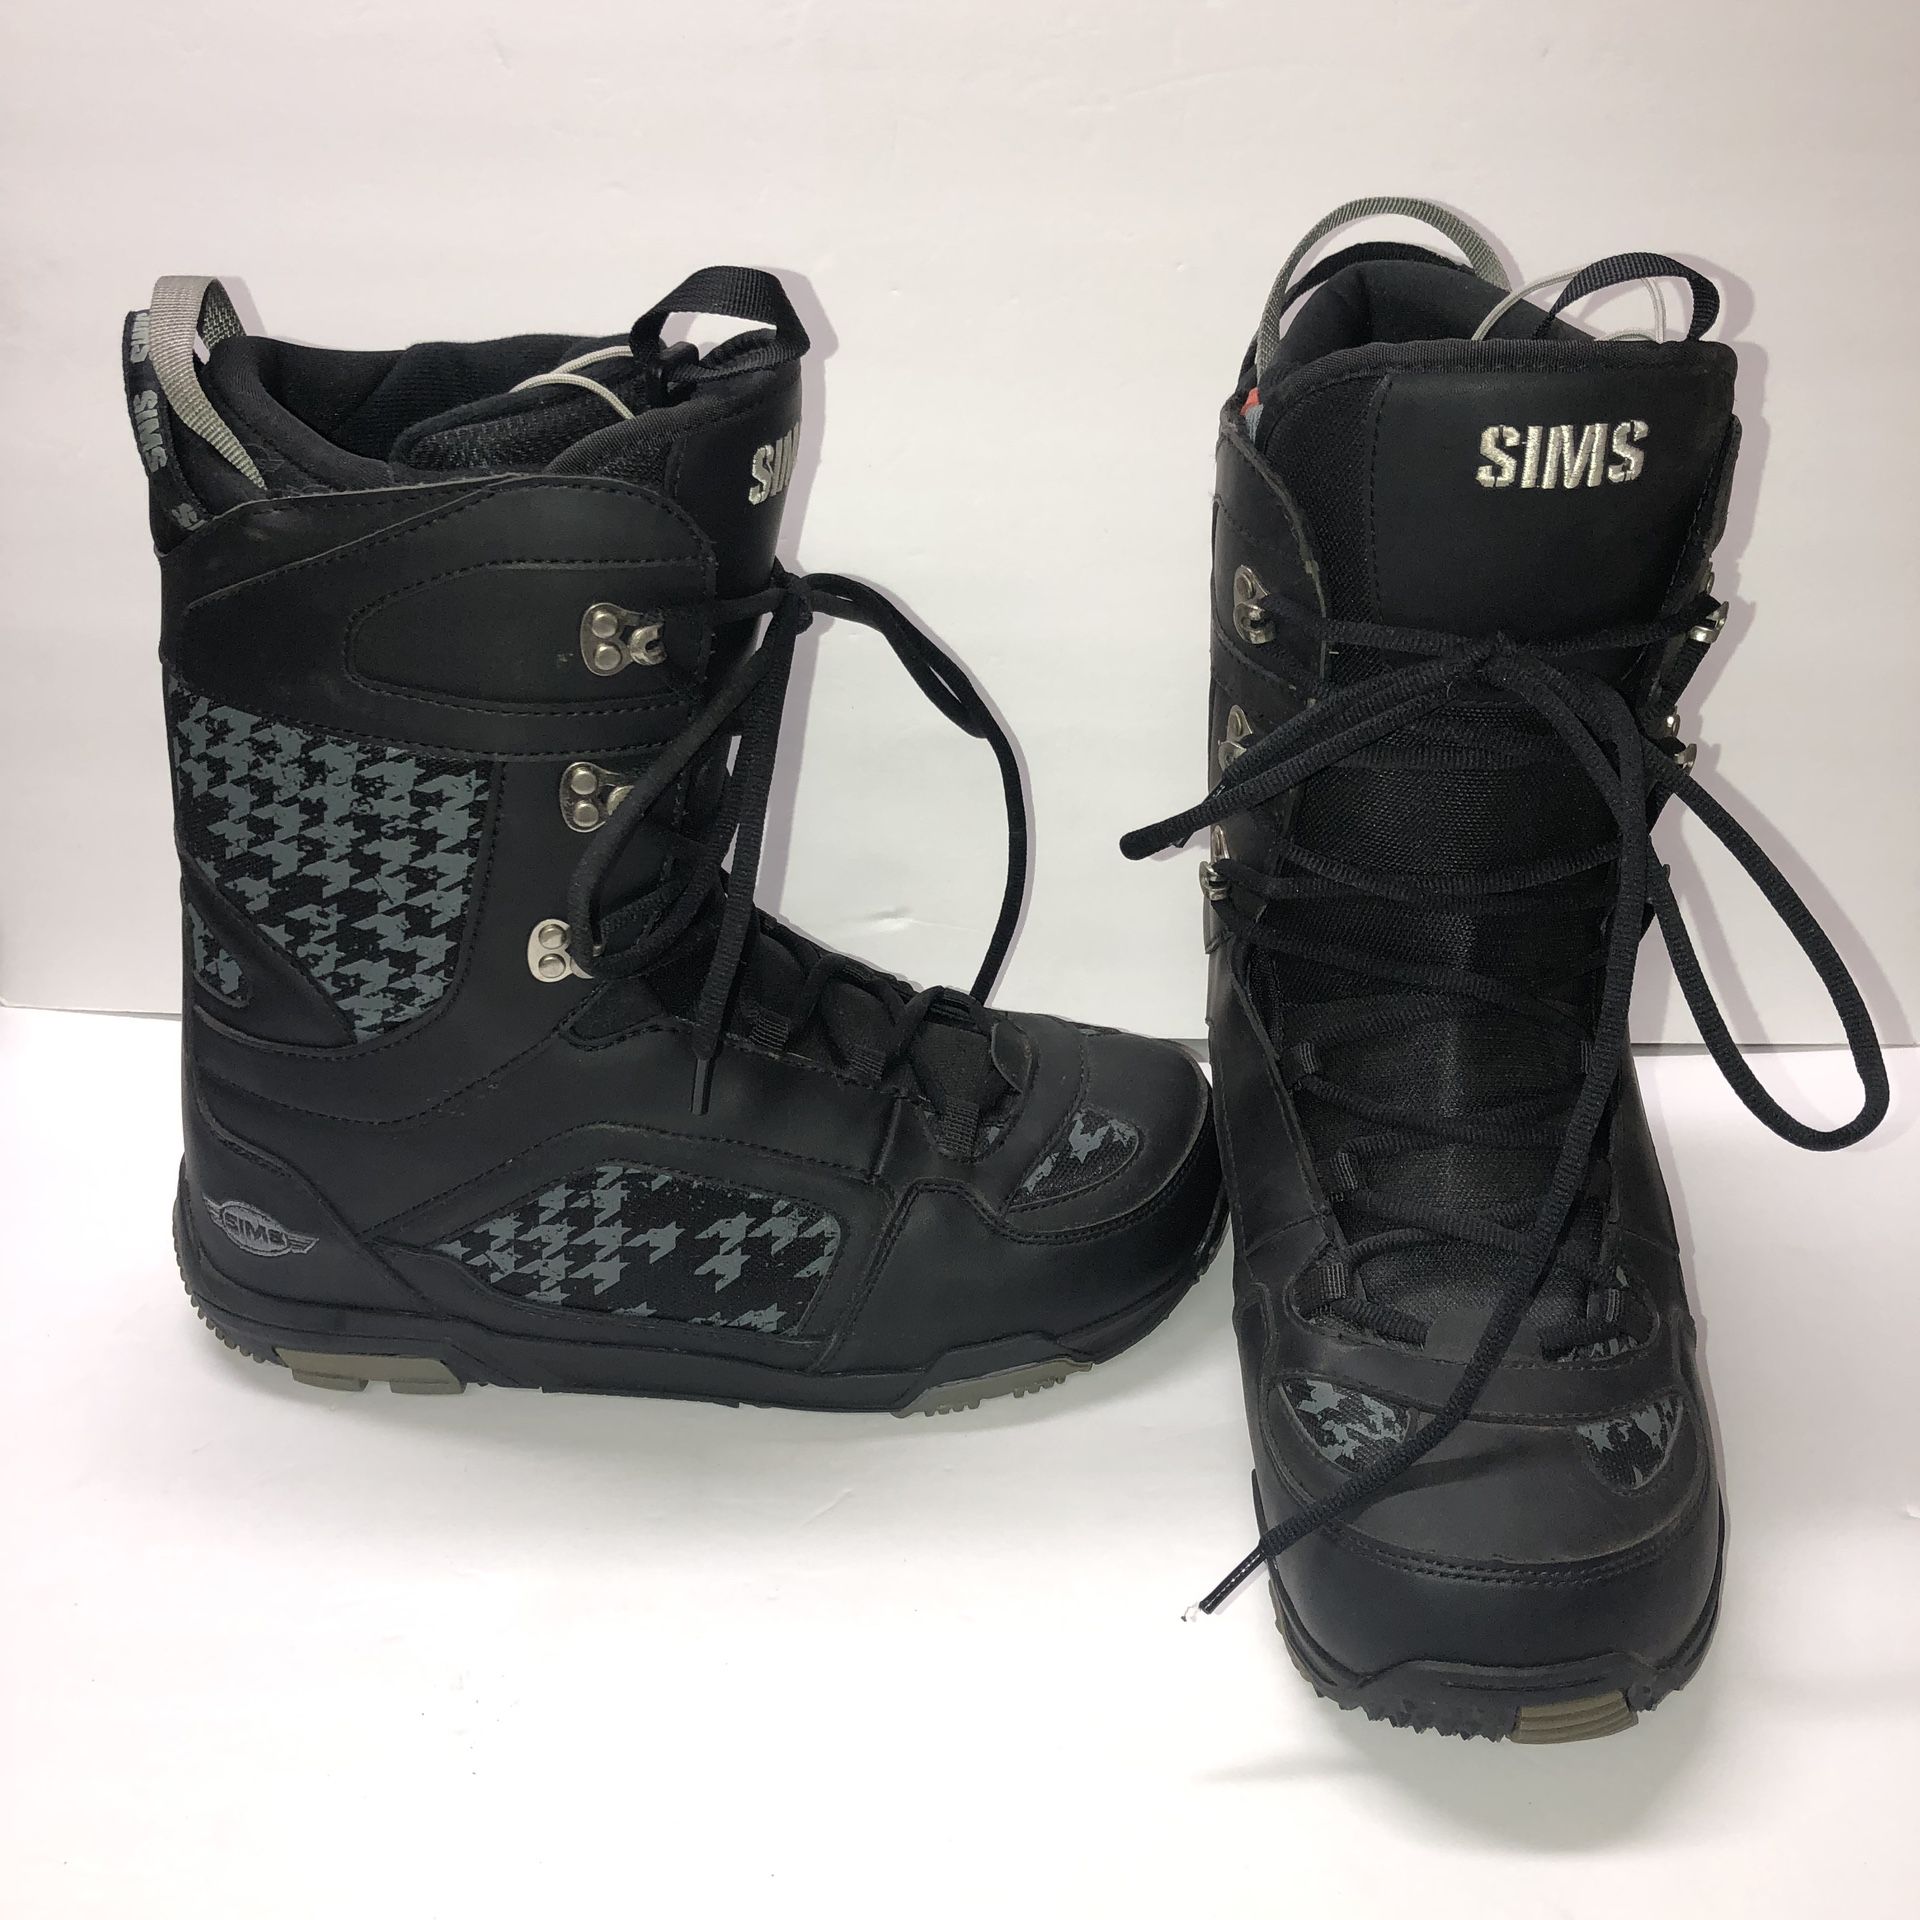 SIMS OMEN SNOW BOARDING BOOTS SIZE 12 LIKE NEW BLACK